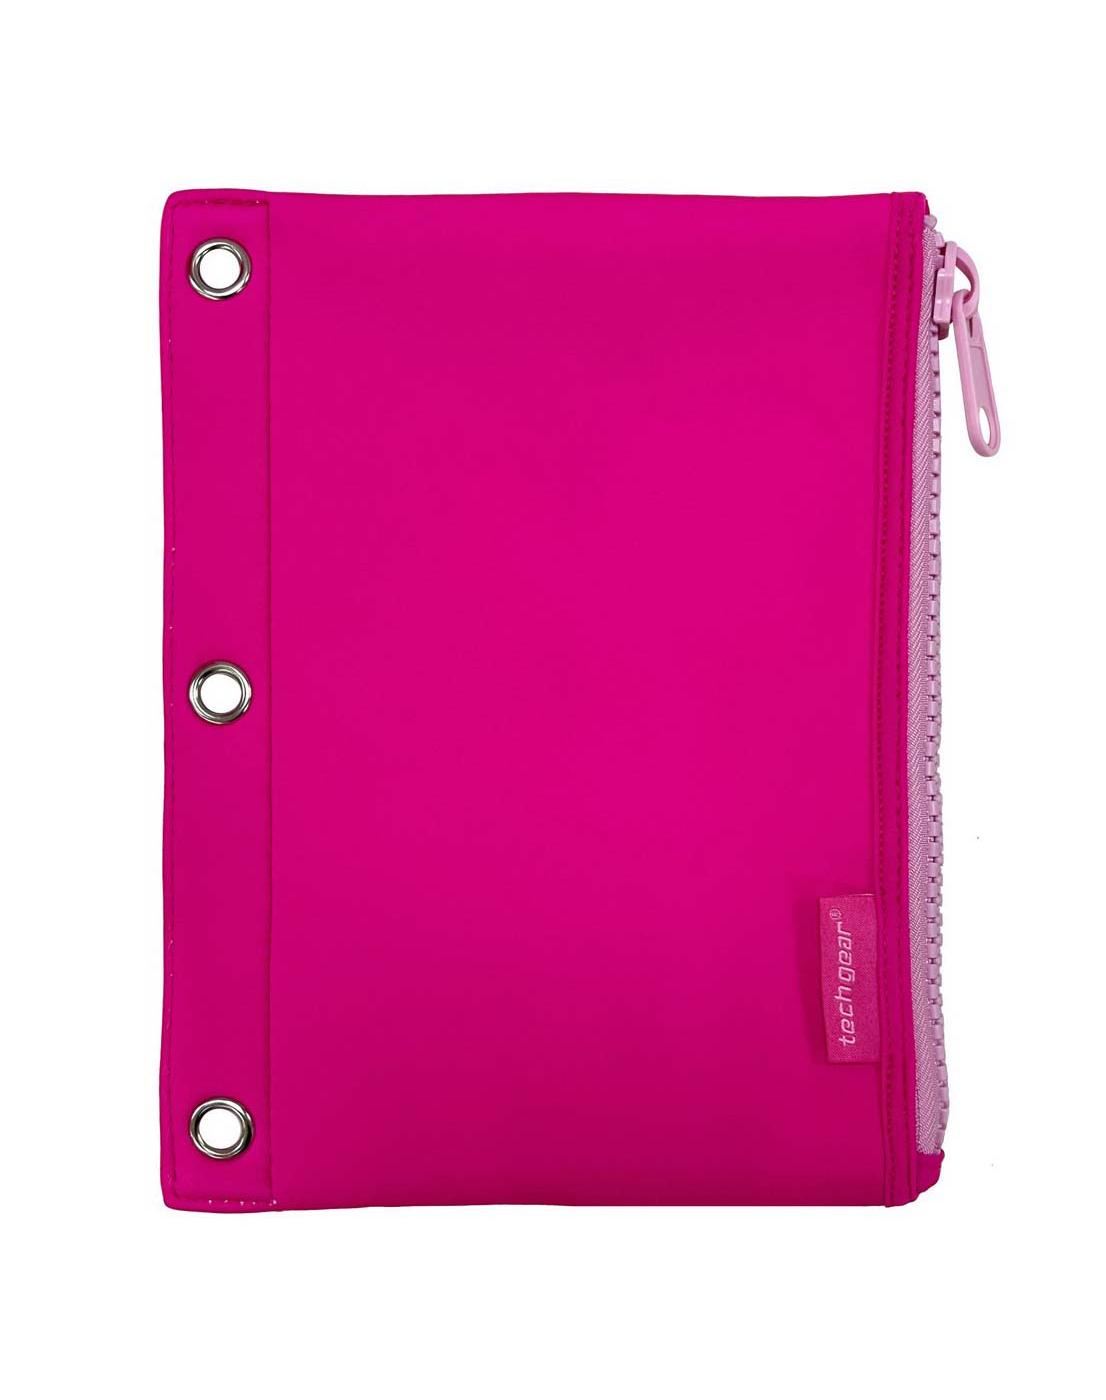 Tech Gear Neo XLZ Binder Pouch - Pink; image 1 of 2